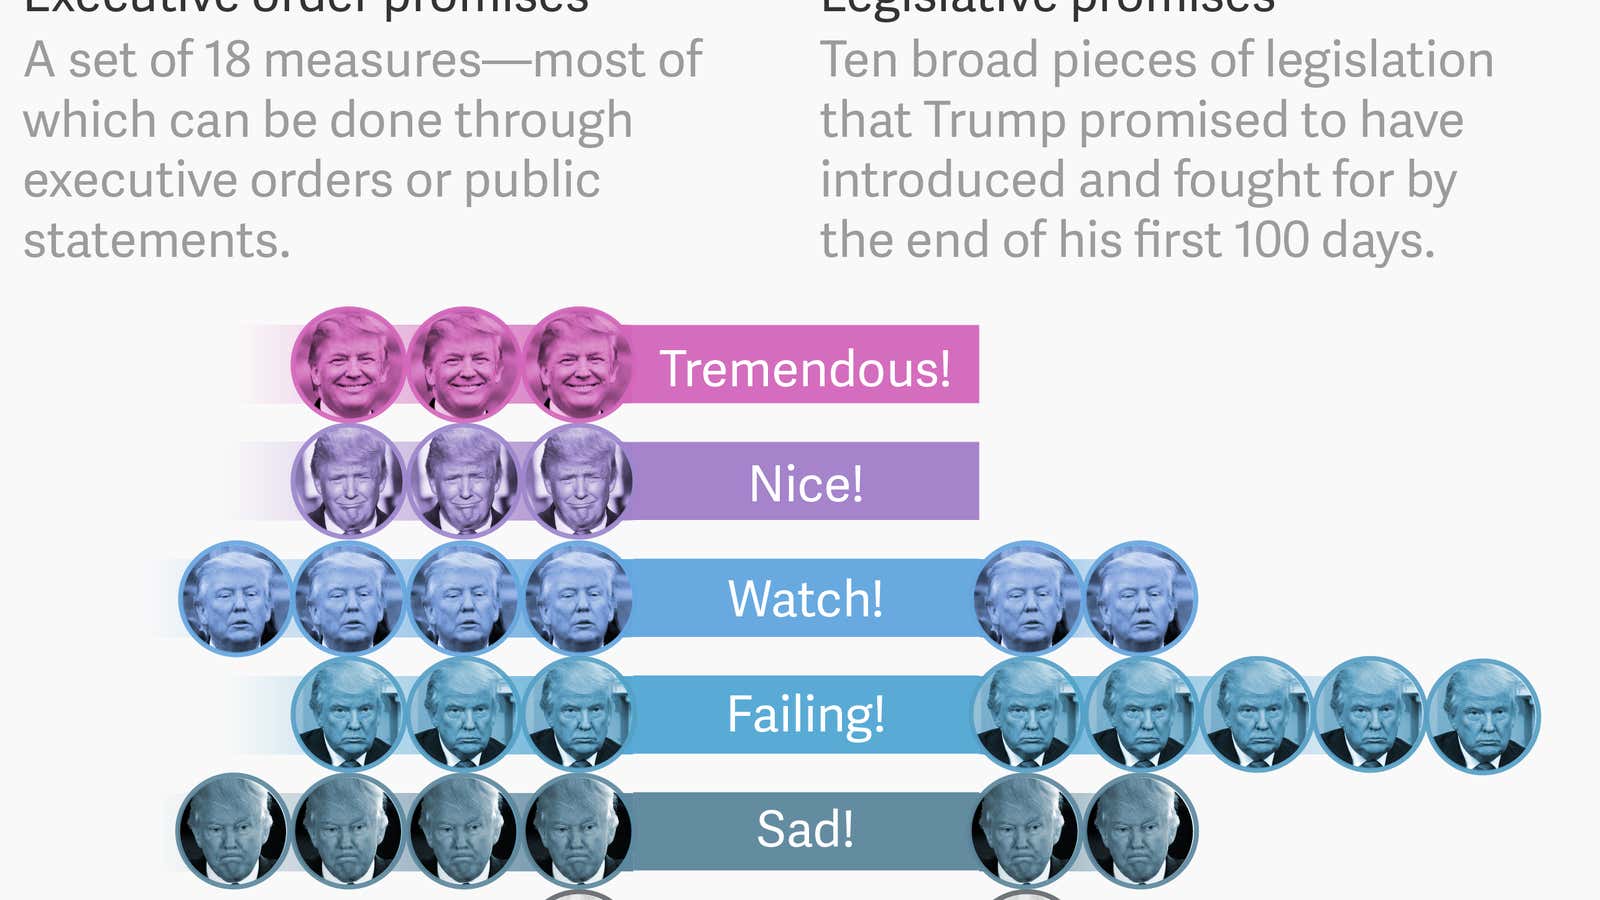 Trump made 28 promises for his first 100 days. We graded how he’s doing half-way through